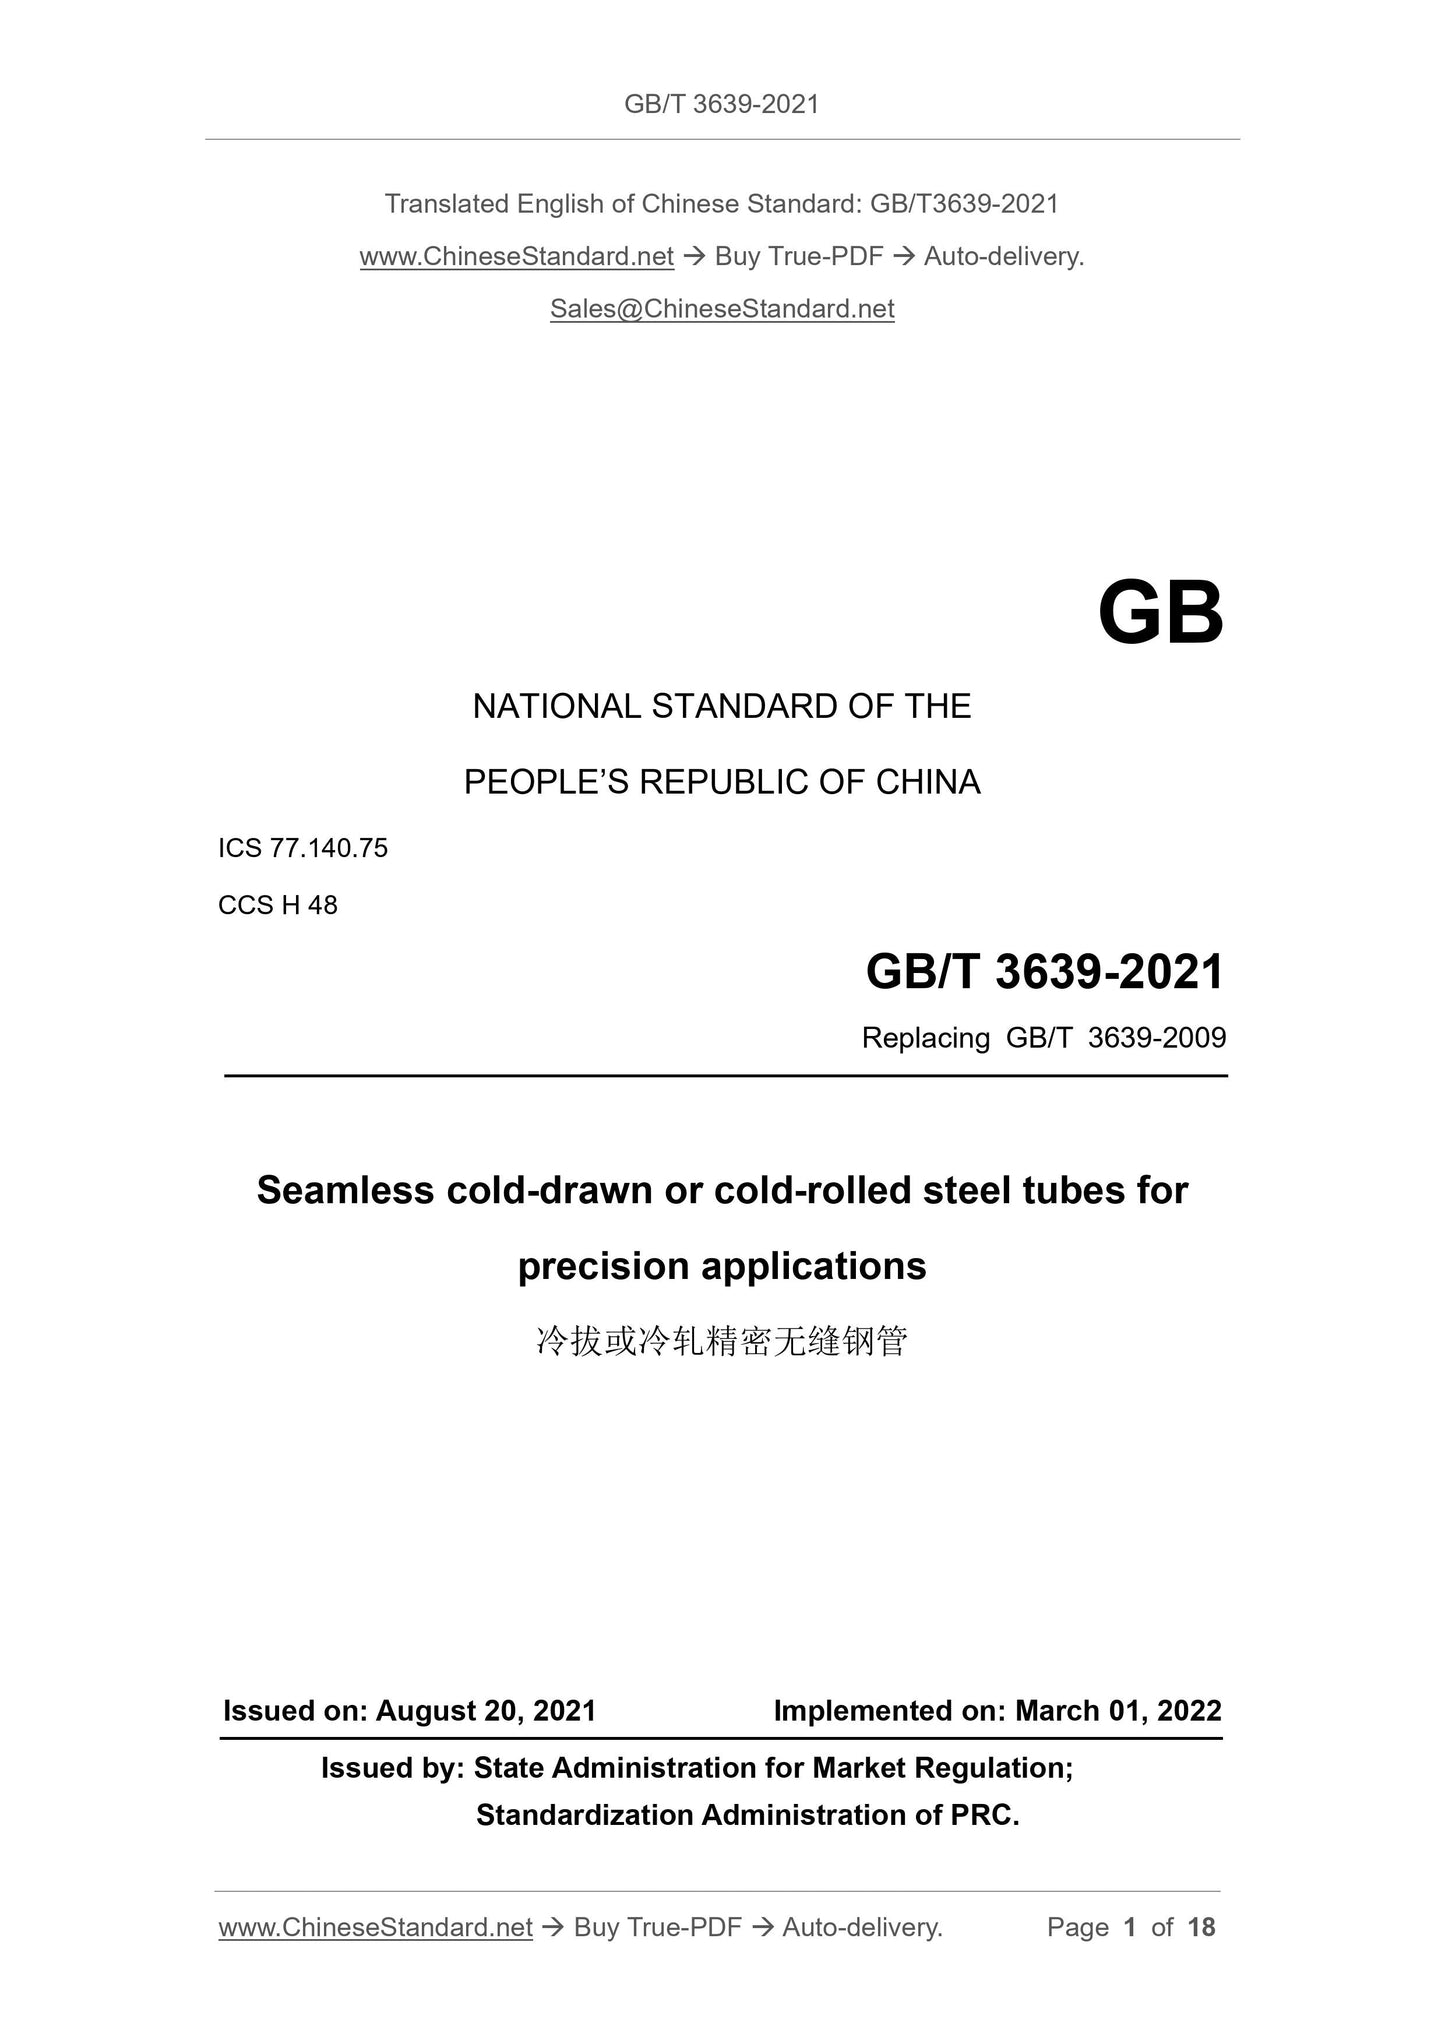 GB/T 3639-2021 Page 1